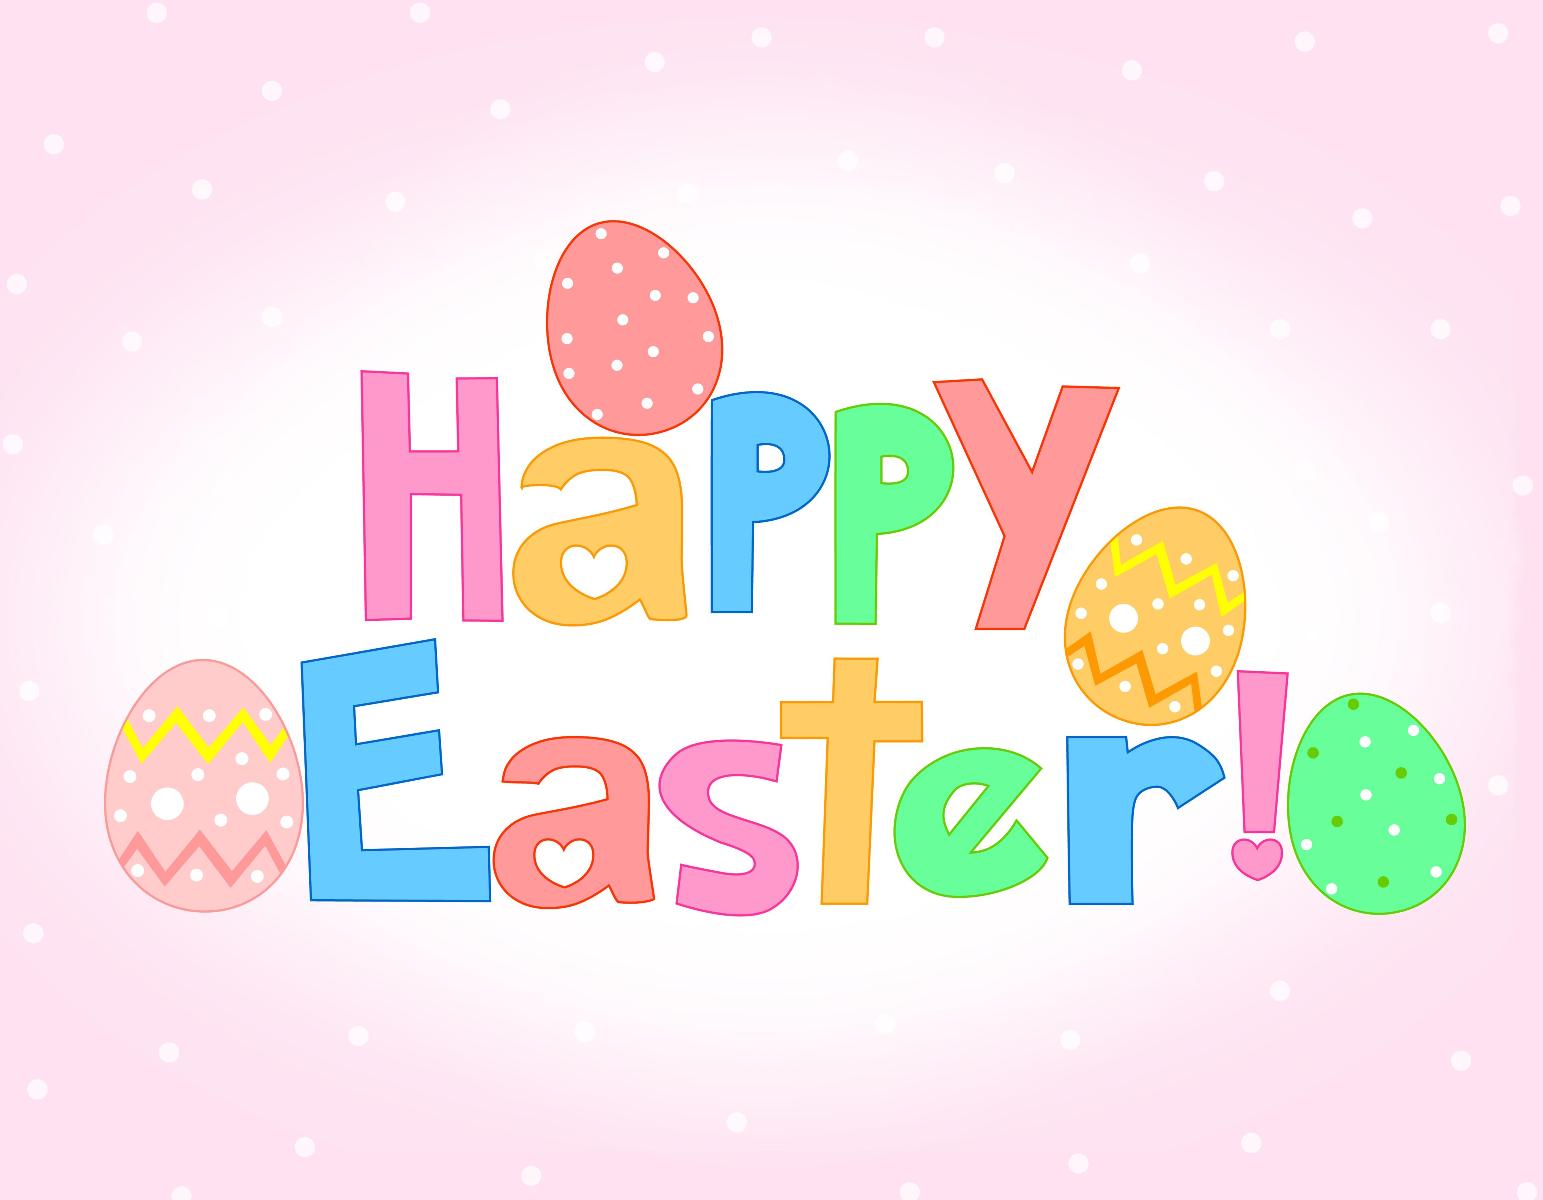 Happy Easter Image Quotes Wishes Messages Pictures